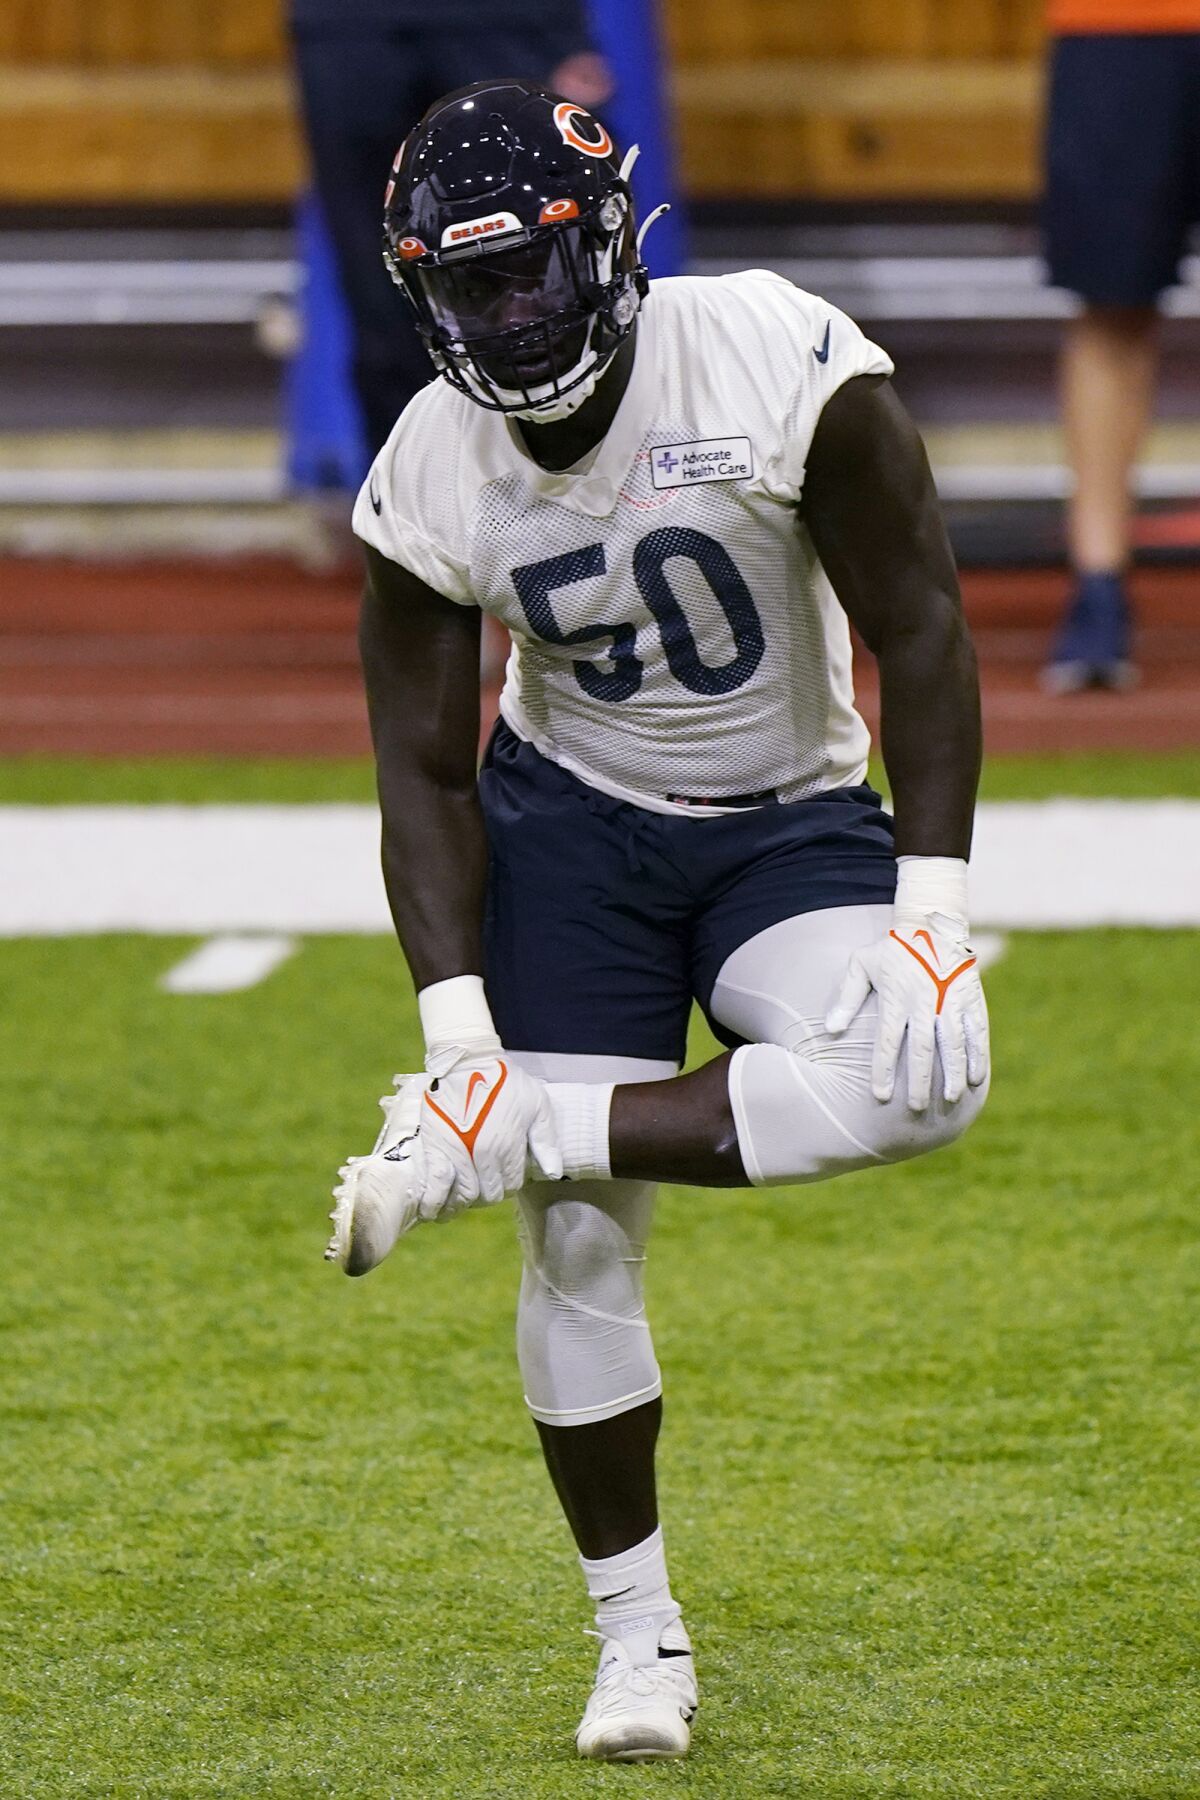 Chicago Bears linebacker Jeremiah Attaochu stretches at the NFL football team's practice facility in Lake Forest, Ill., Wednesday, June 8, 2022. (AP Photo/Nam Y. Huh)